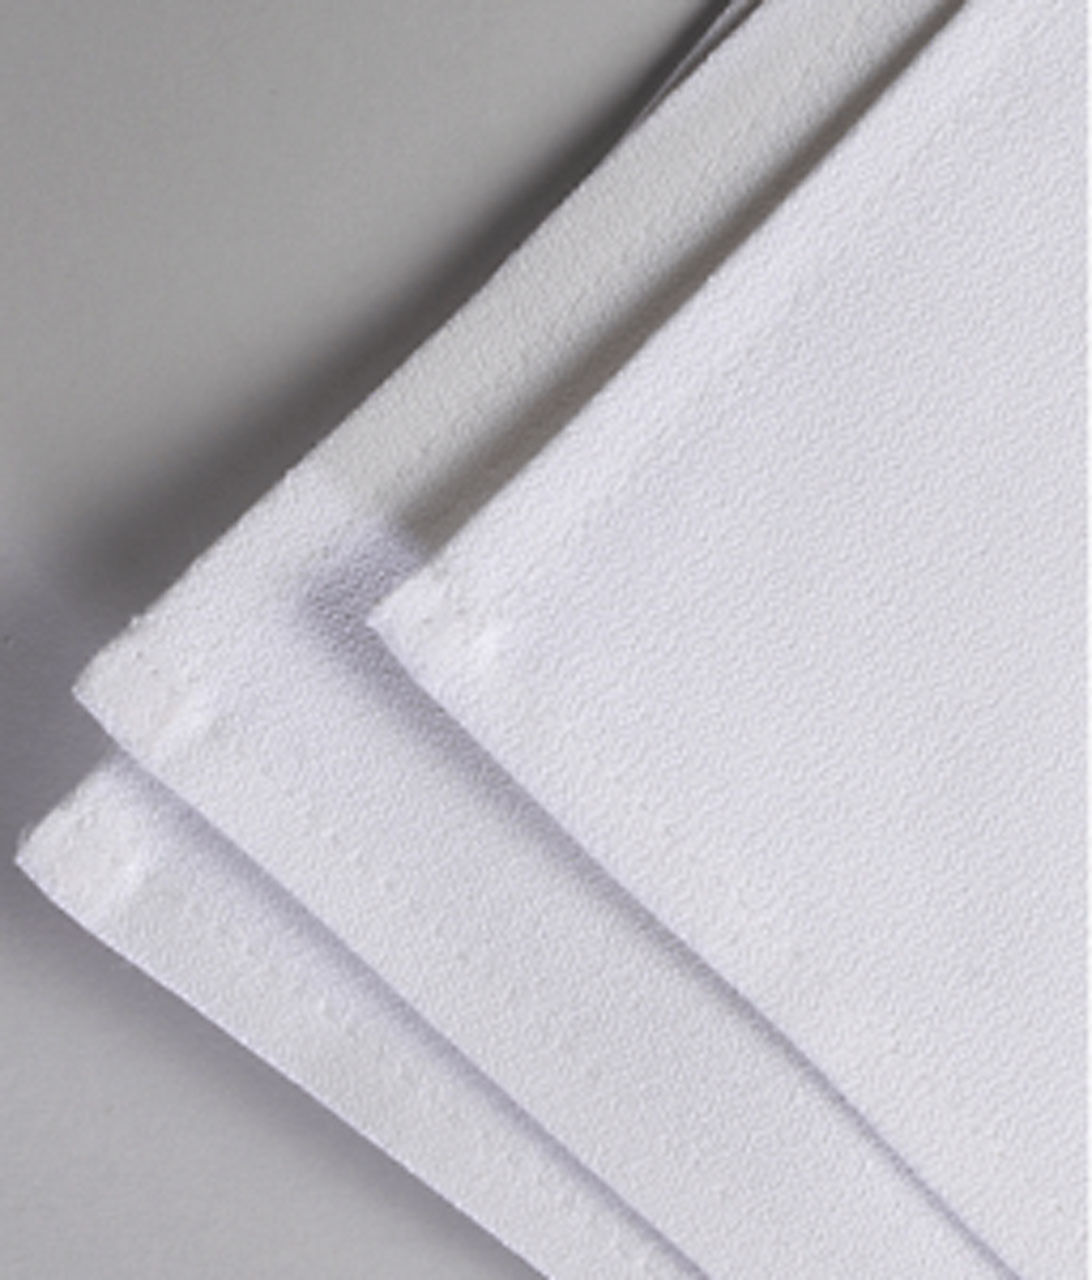 Can I use the Cotton Momie Napkins made from momie fabric anywhere?